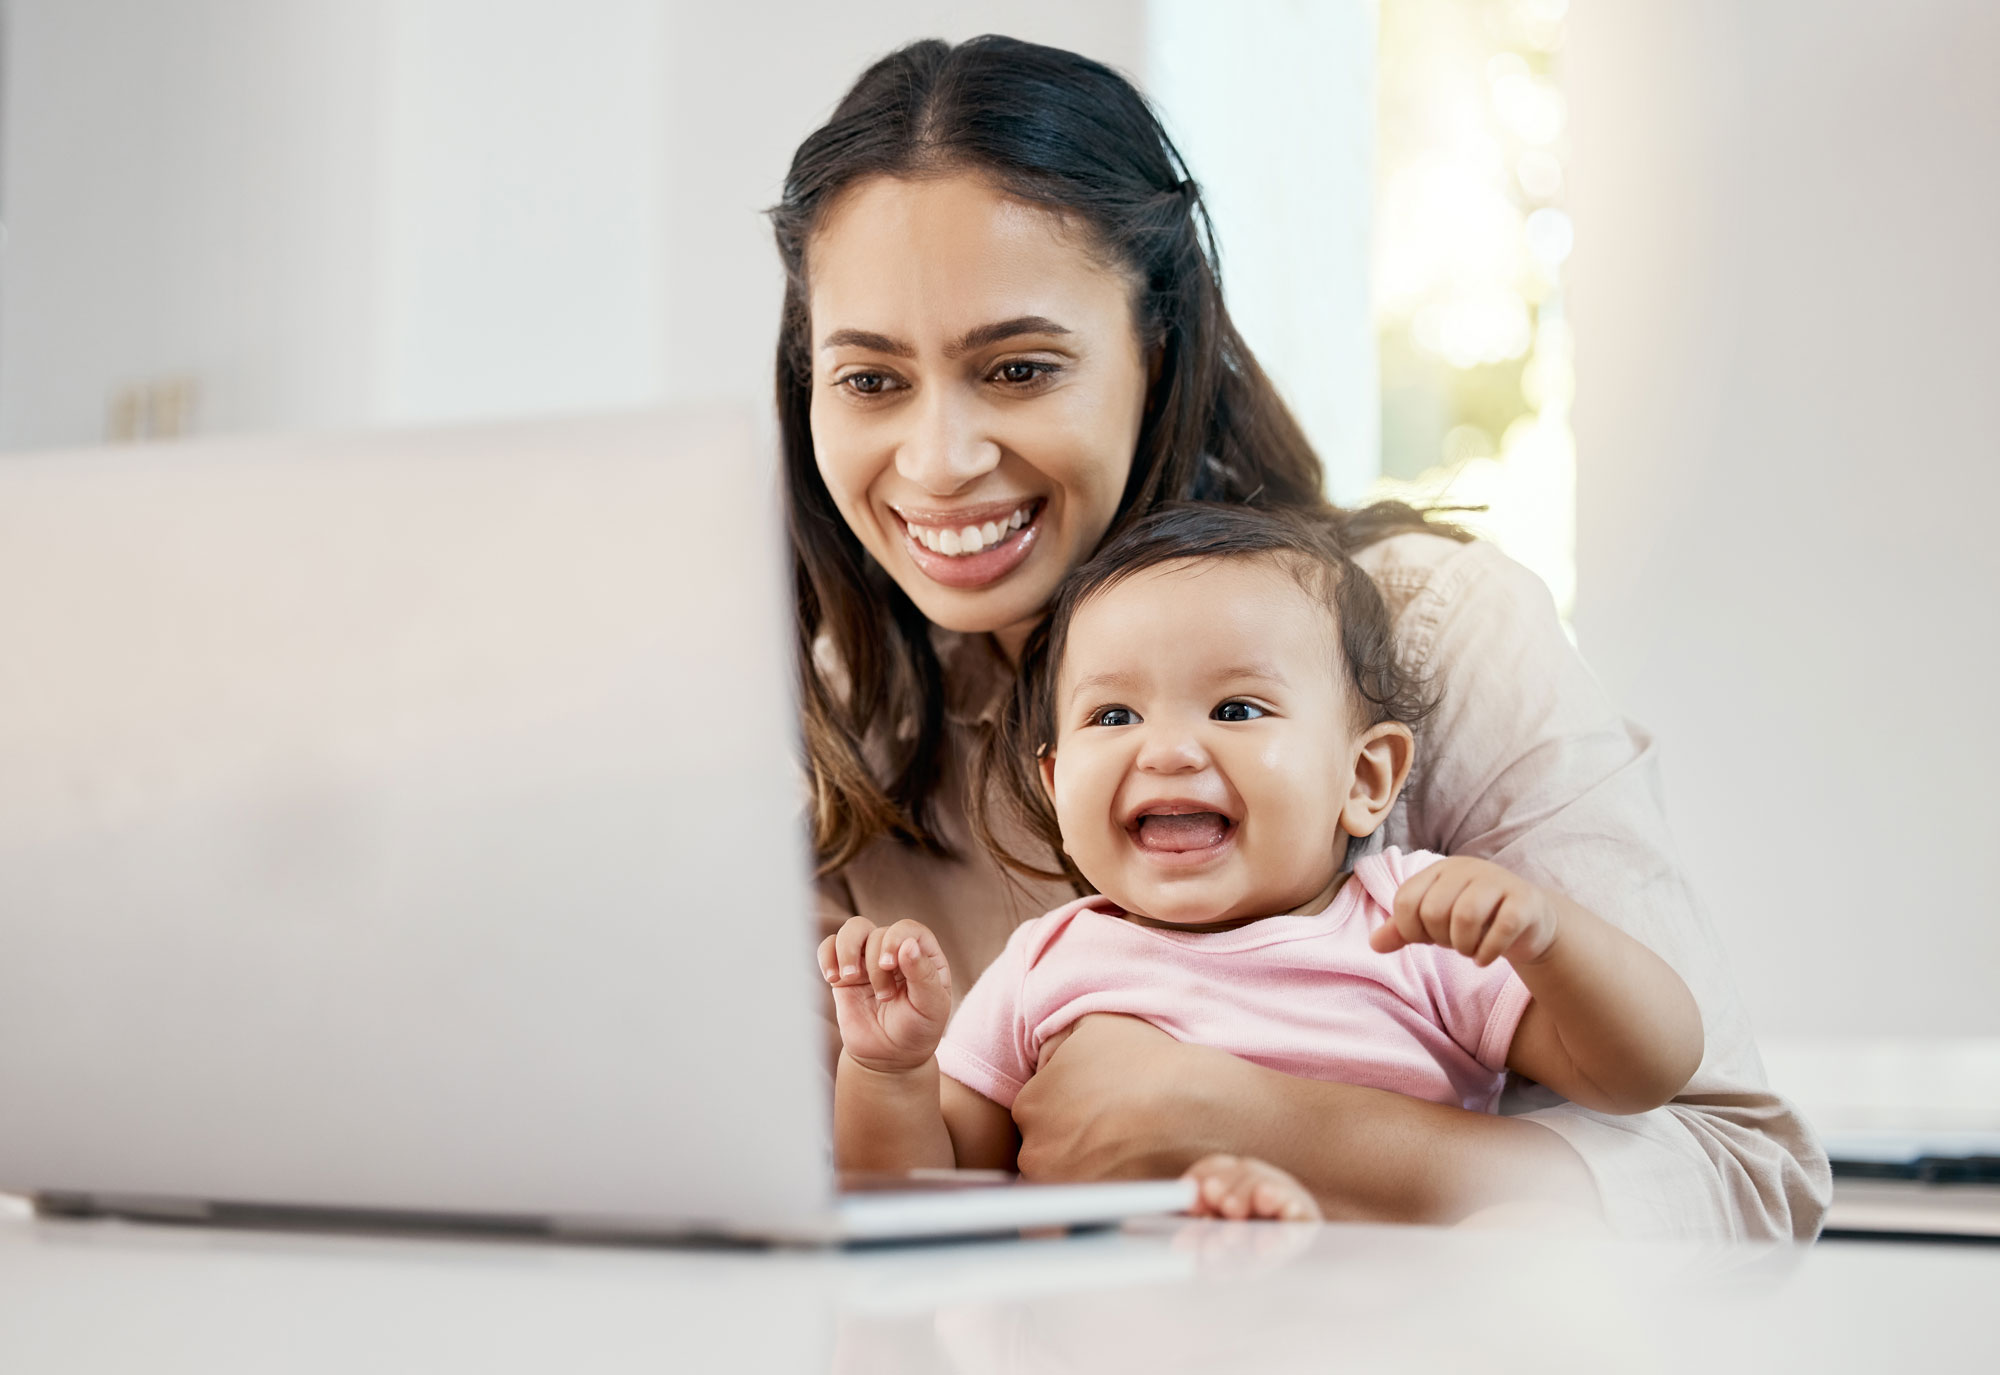 Mom and baby smiling while looking at a computer screen